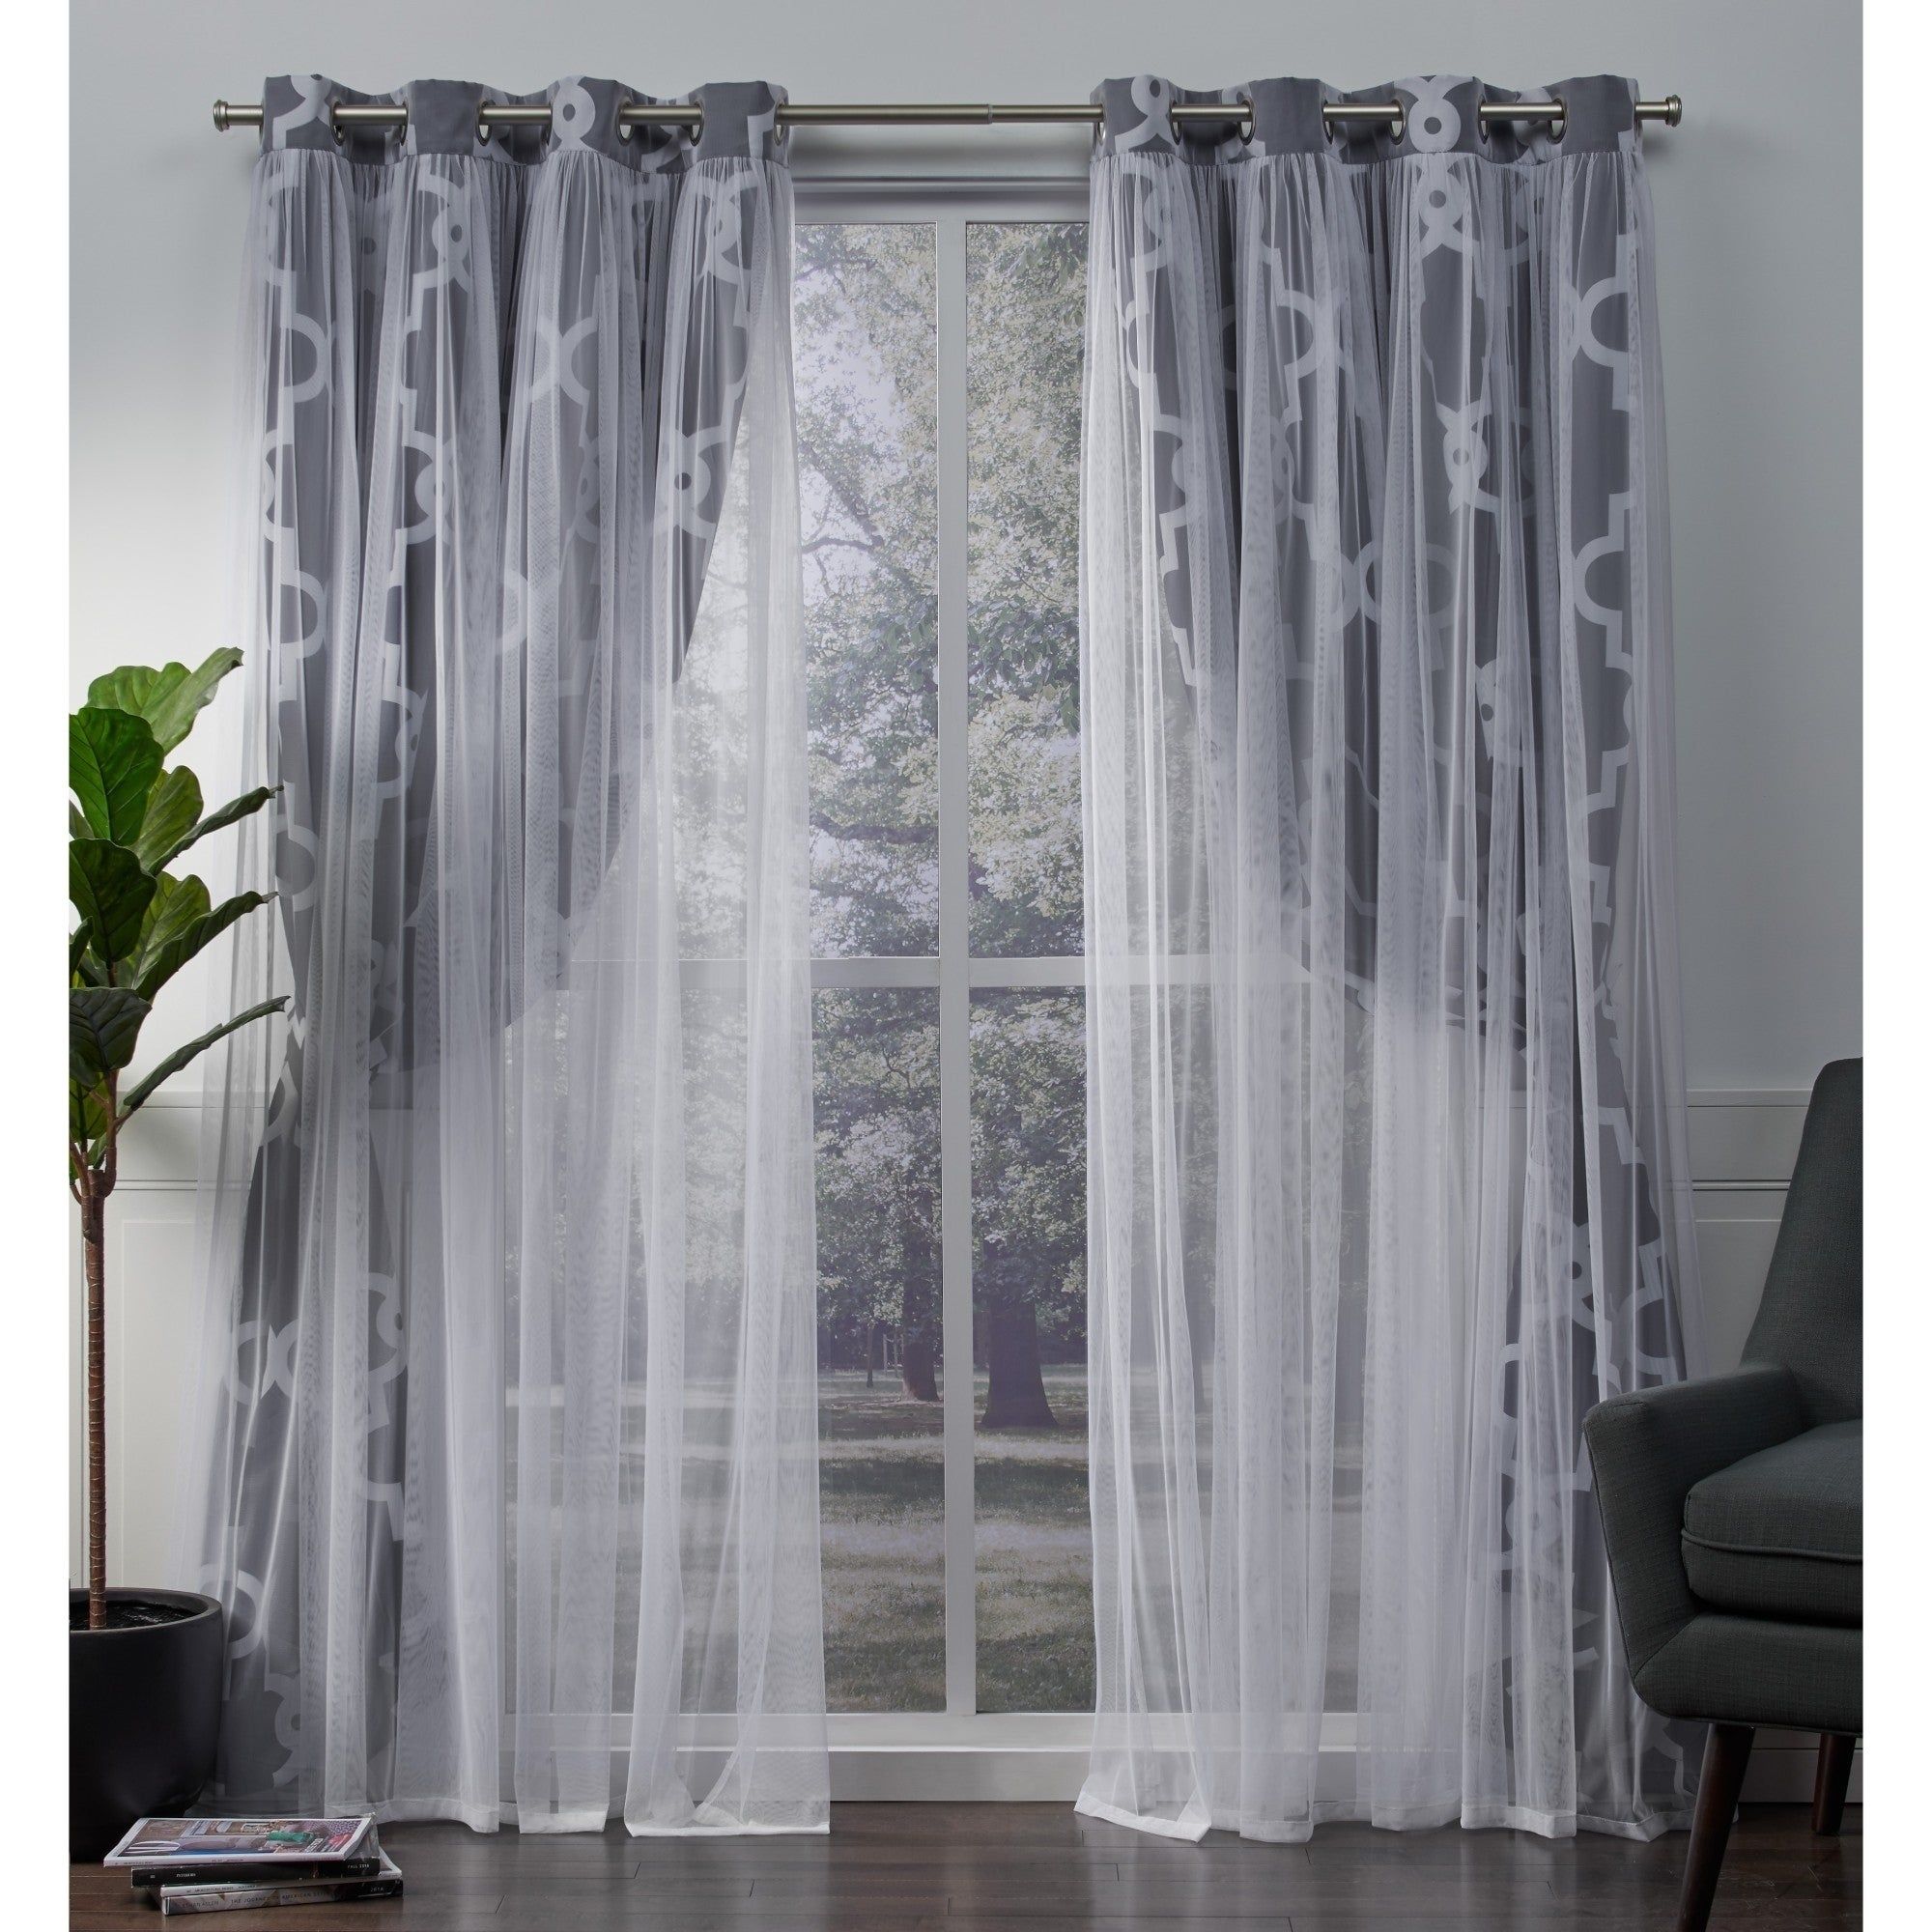 Details About Ati Home Alegra Thermal Woven Blackout Grommet Top Curtain Throughout Woven Blackout Curtain Panel Pairs With Grommet Top (View 8 of 30)